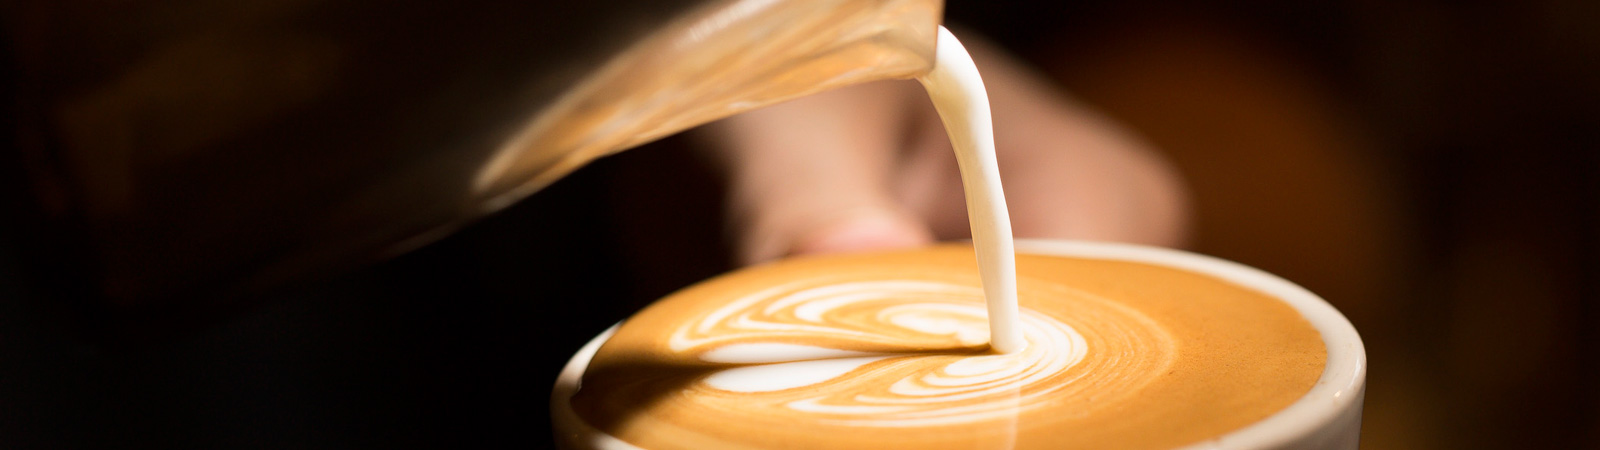 Milk being poured into a latte in a mug.